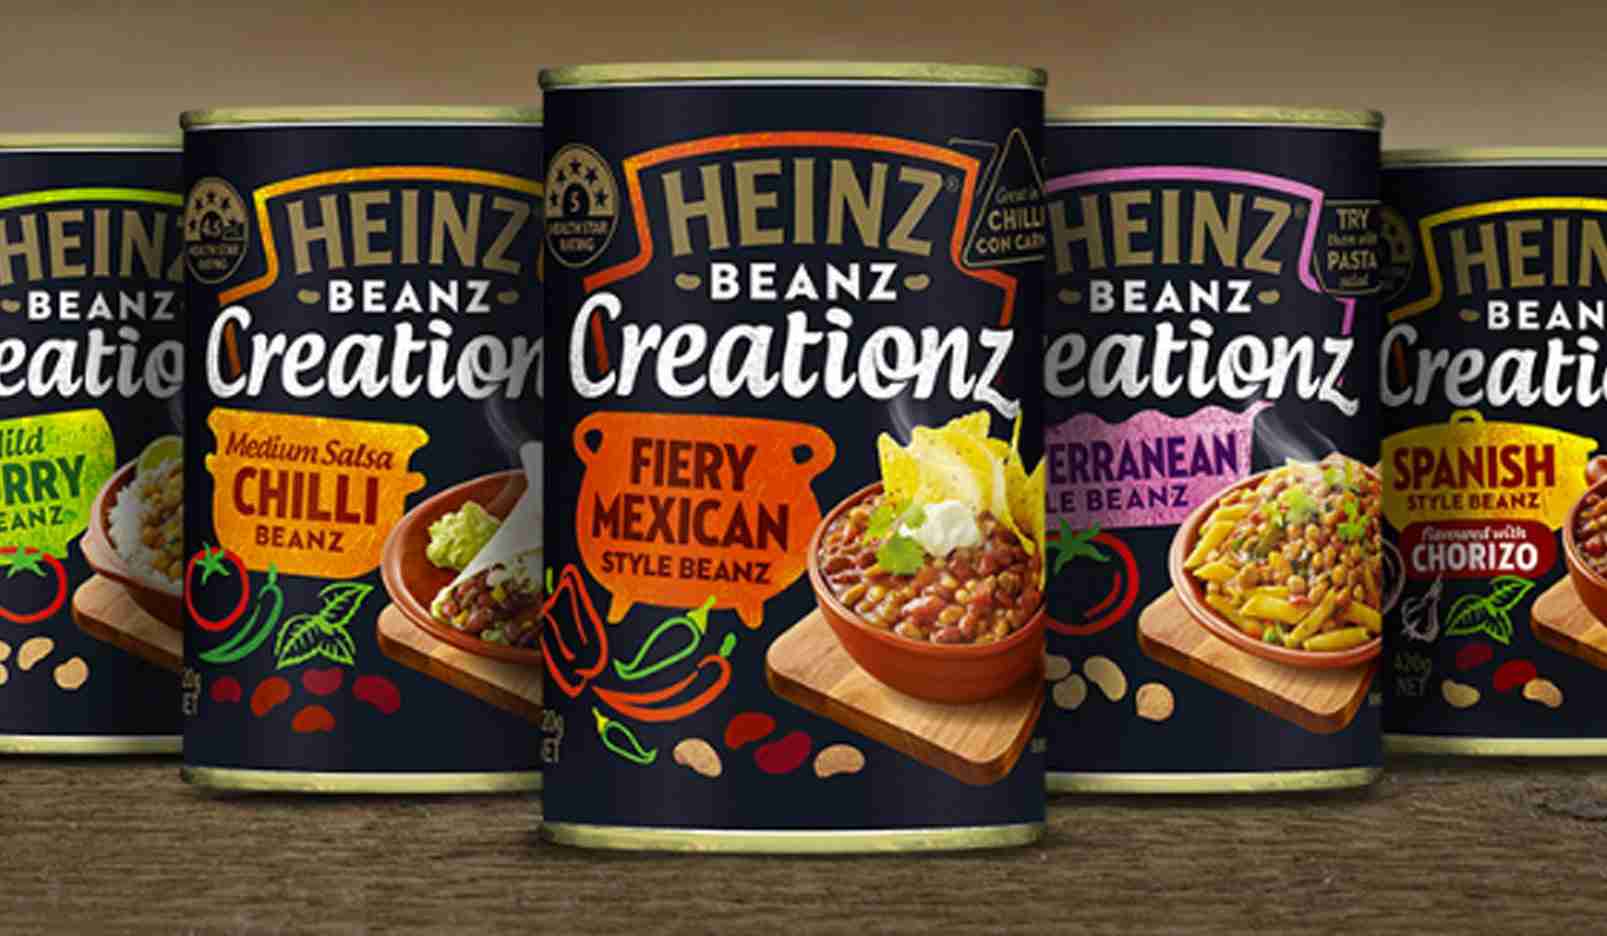 This image shows the new Heinz Beans Cans with their new marketing flavour, depicting the effect on their actual product of their use of Design thinking principles